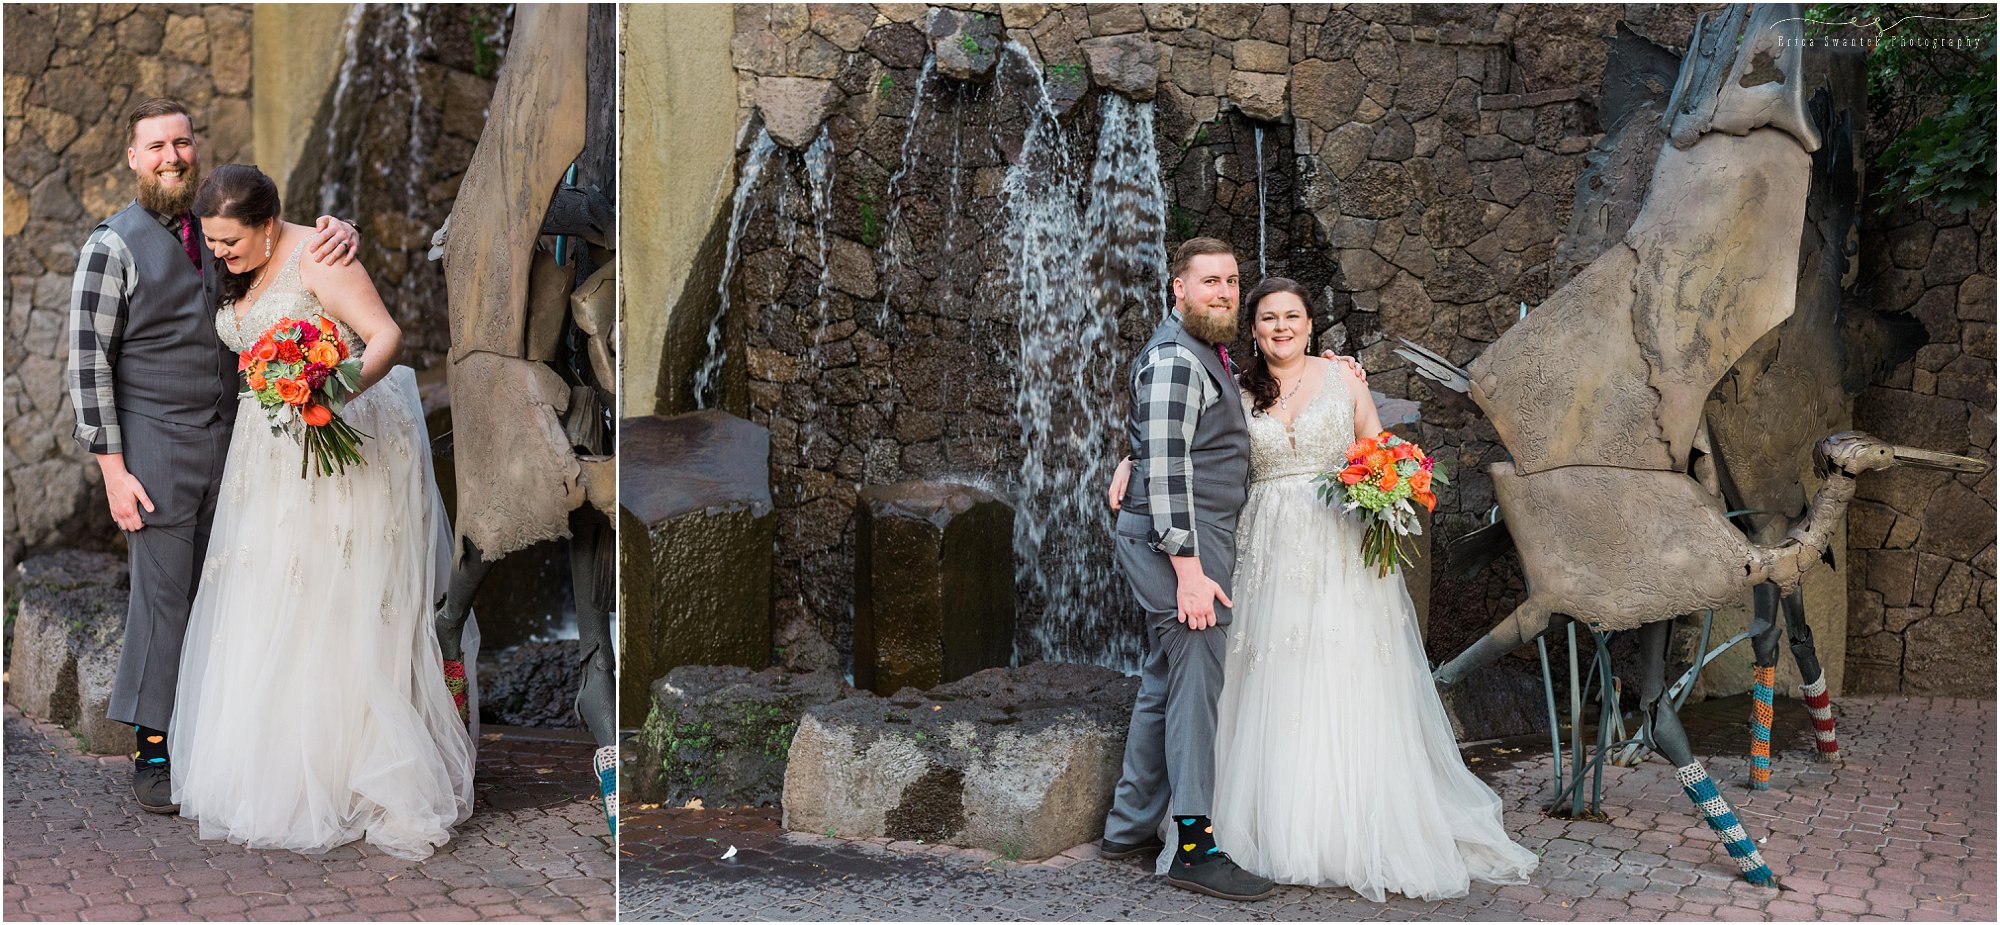 Downtown Bend Oregon is a beautiful place for your wedding day photos. | Erica Swantek Photography